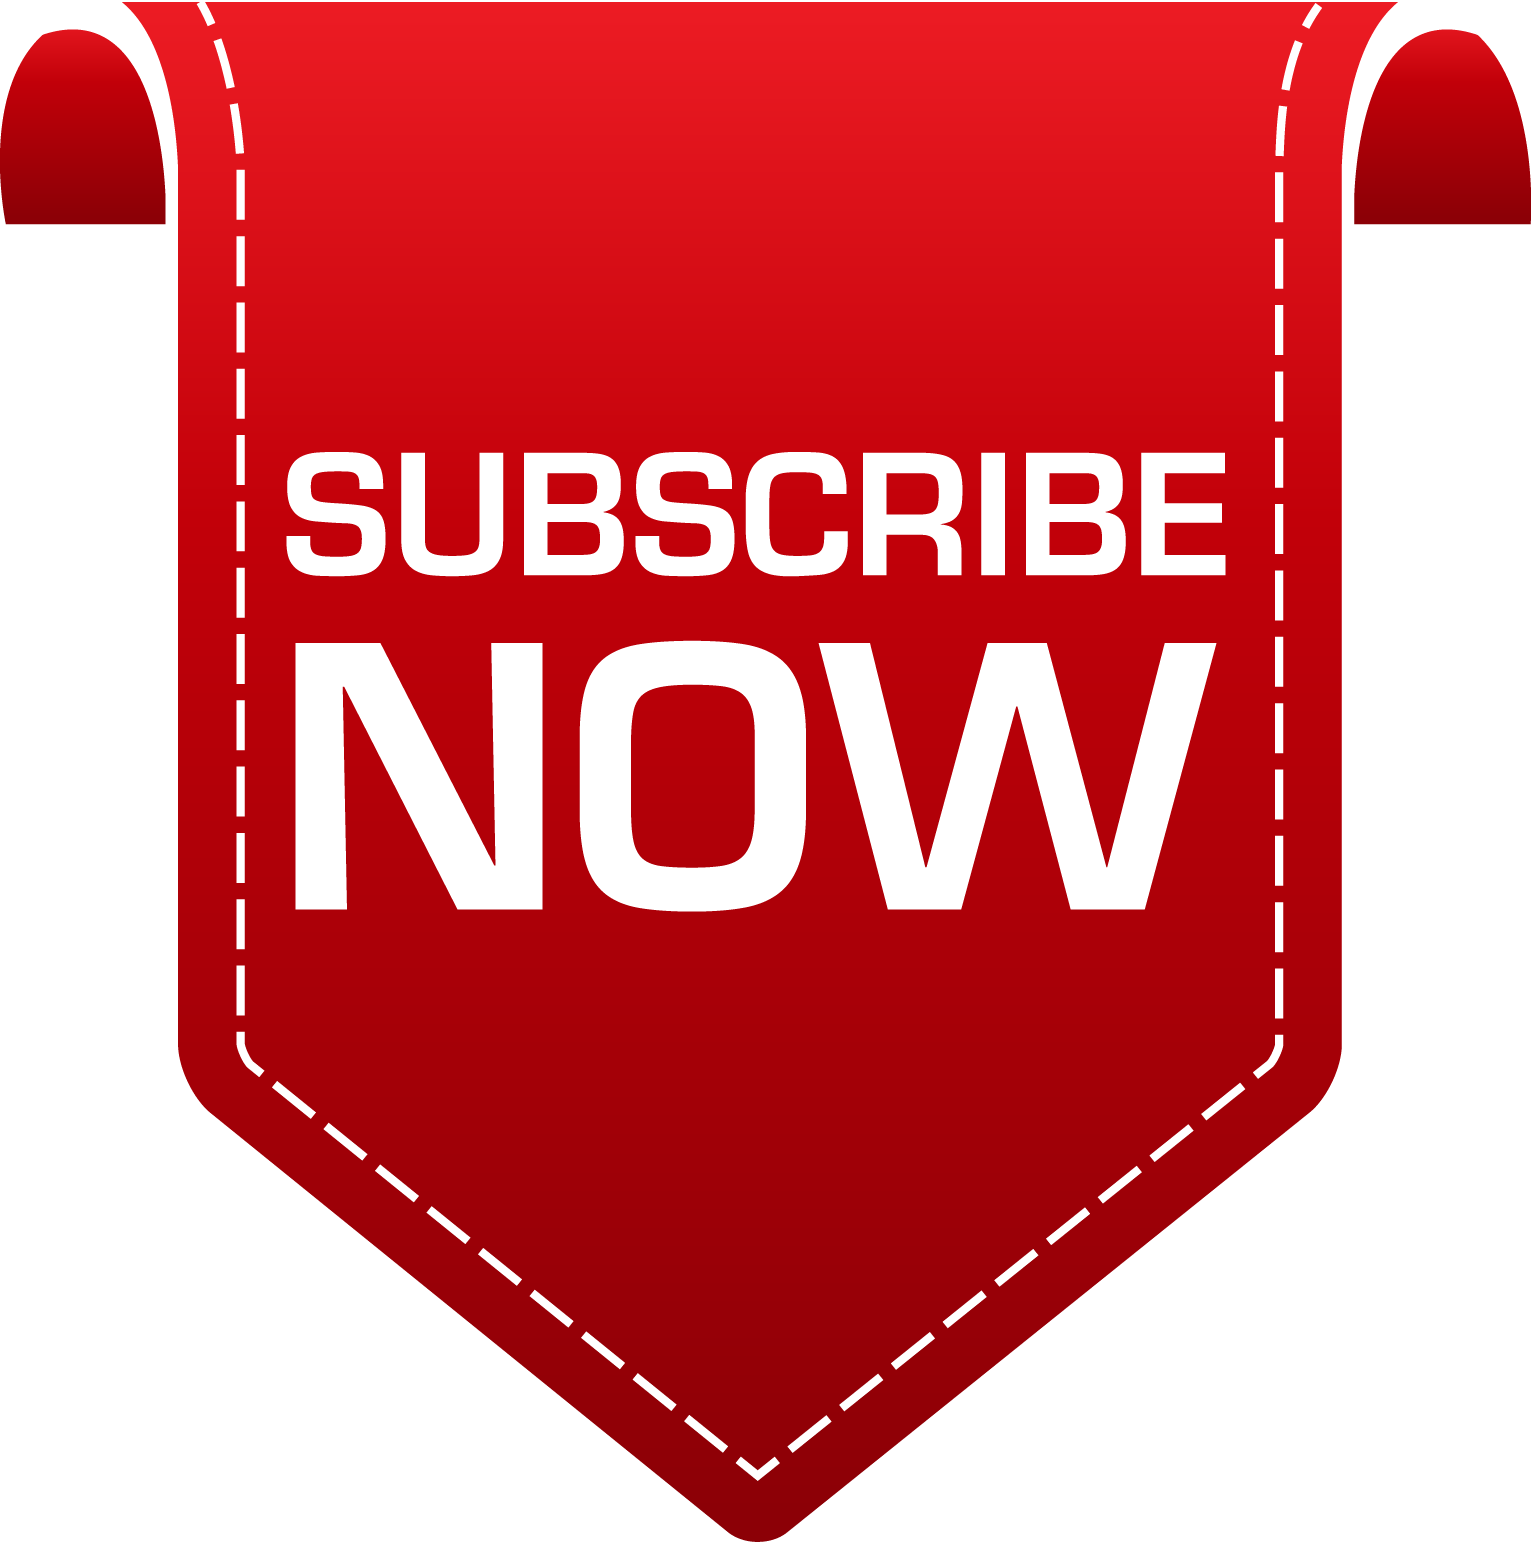 a red badge with subscribe now written on it